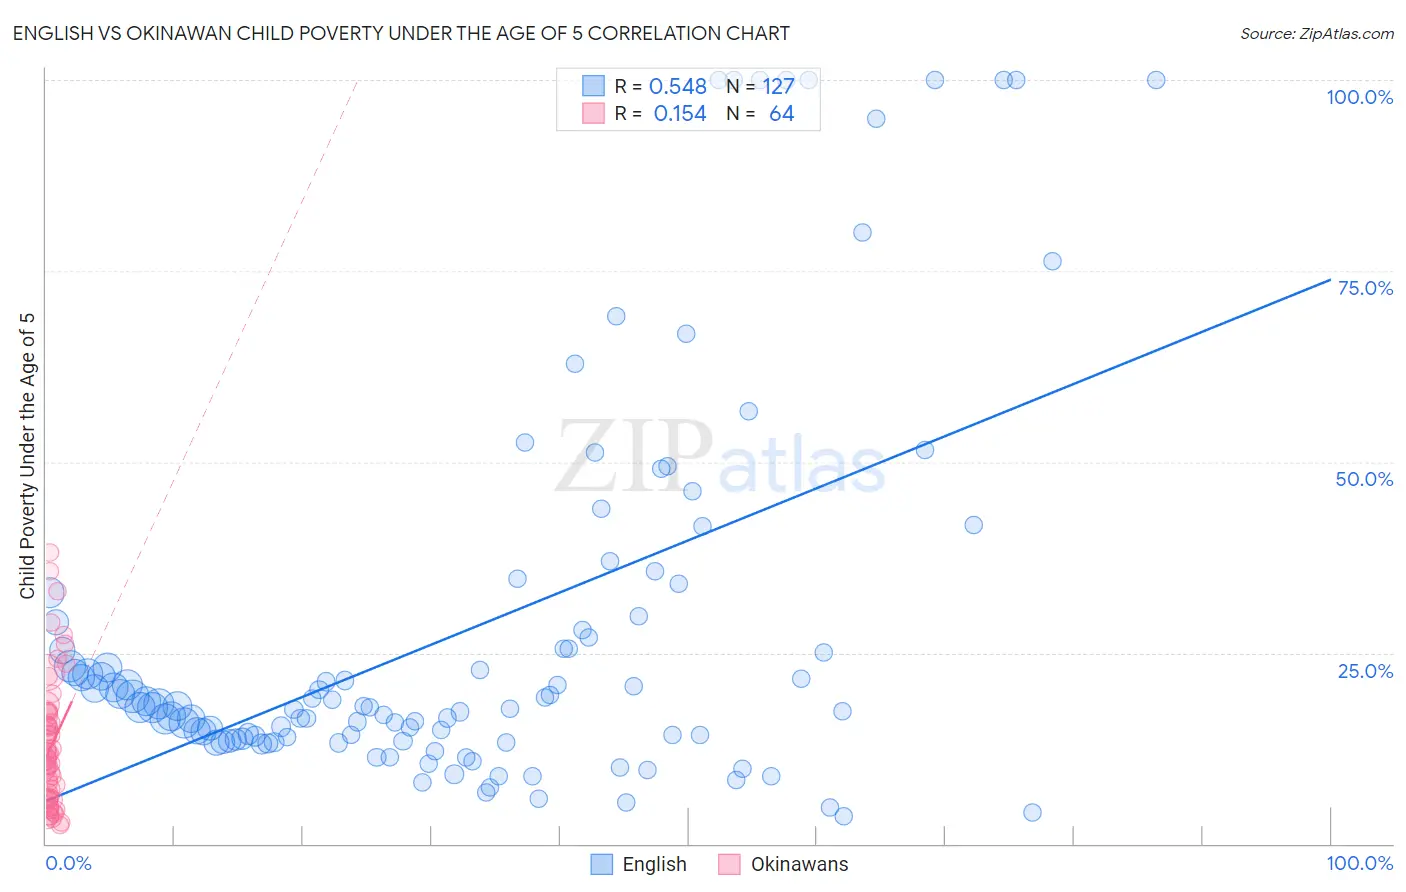 English vs Okinawan Child Poverty Under the Age of 5